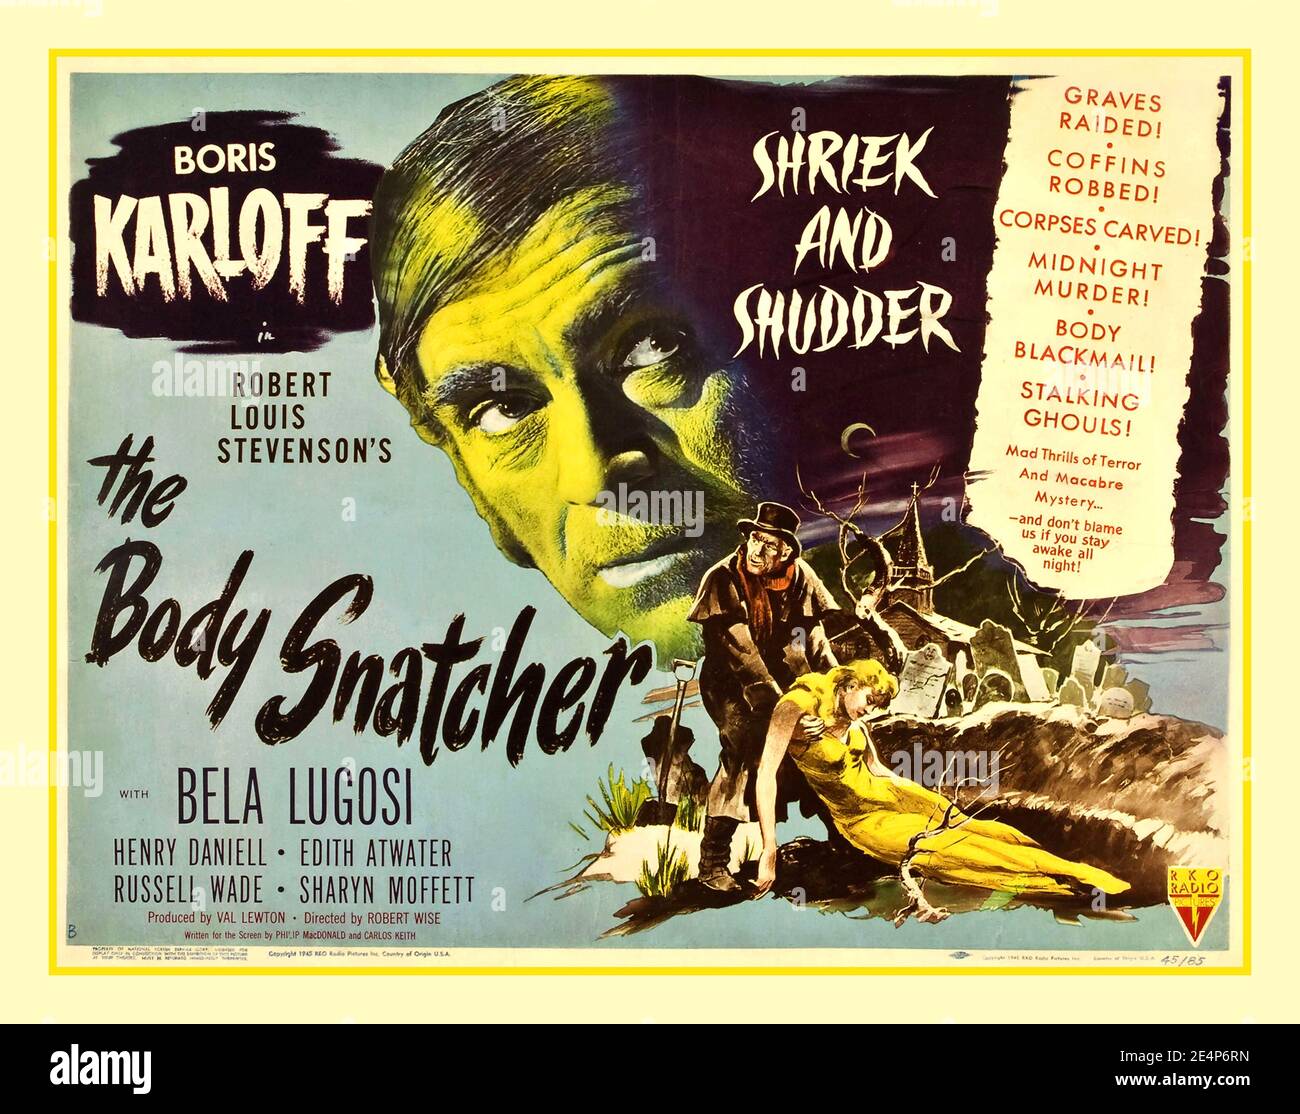 THE BODY SNATCHER KARLOFF Vintage Horror Movie Poster for 1945 RKO studios film starring Boris Karloff with Bela Lugosi, Henry Daniell, Edith Atwater Russel Wade, Sharyn Moffett Directed by Robert Wise from a story by Robert Louis Stevenson Stock Photo